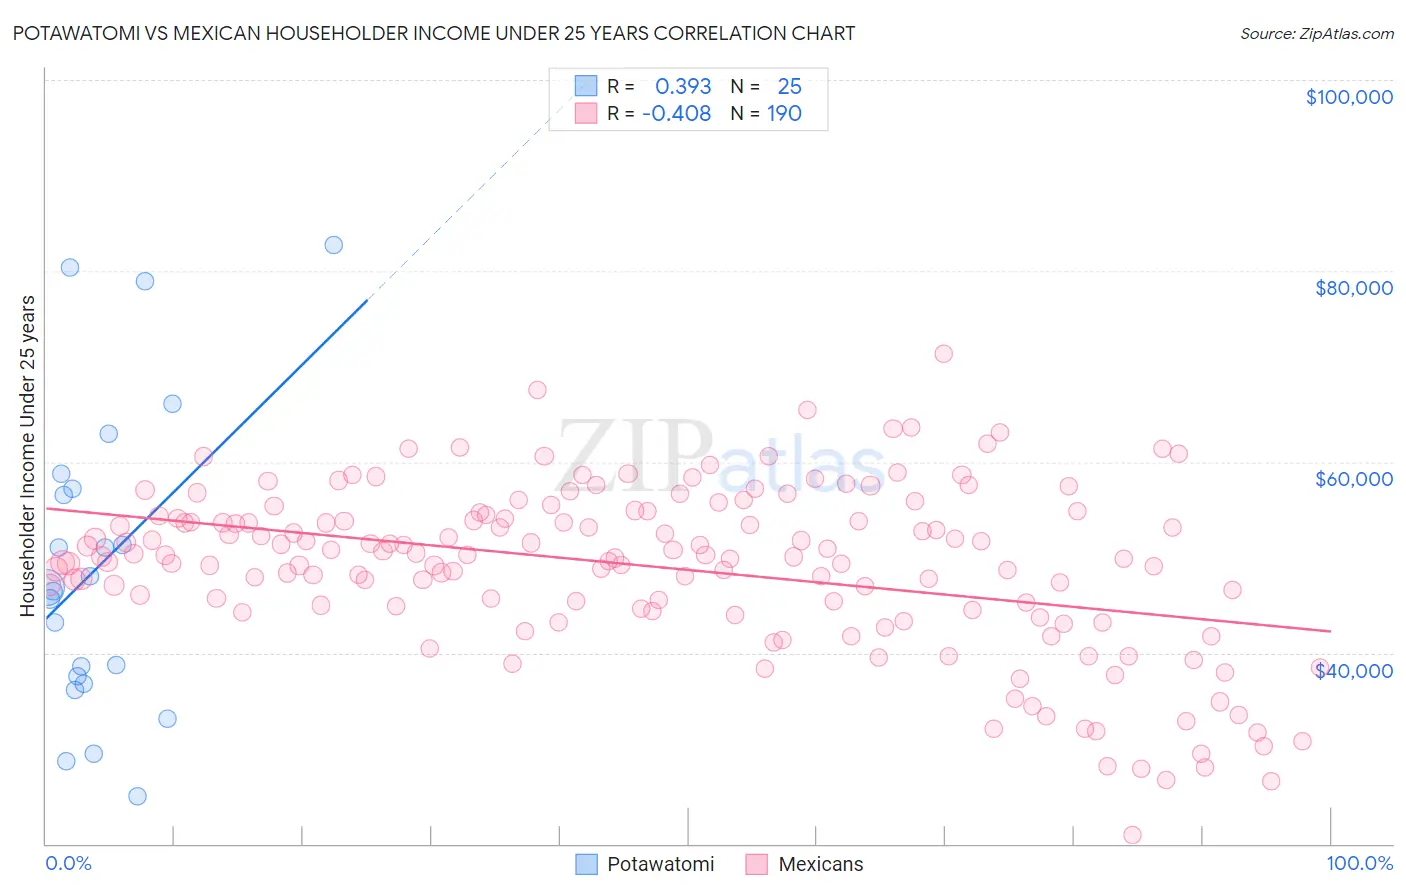 Potawatomi vs Mexican Householder Income Under 25 years